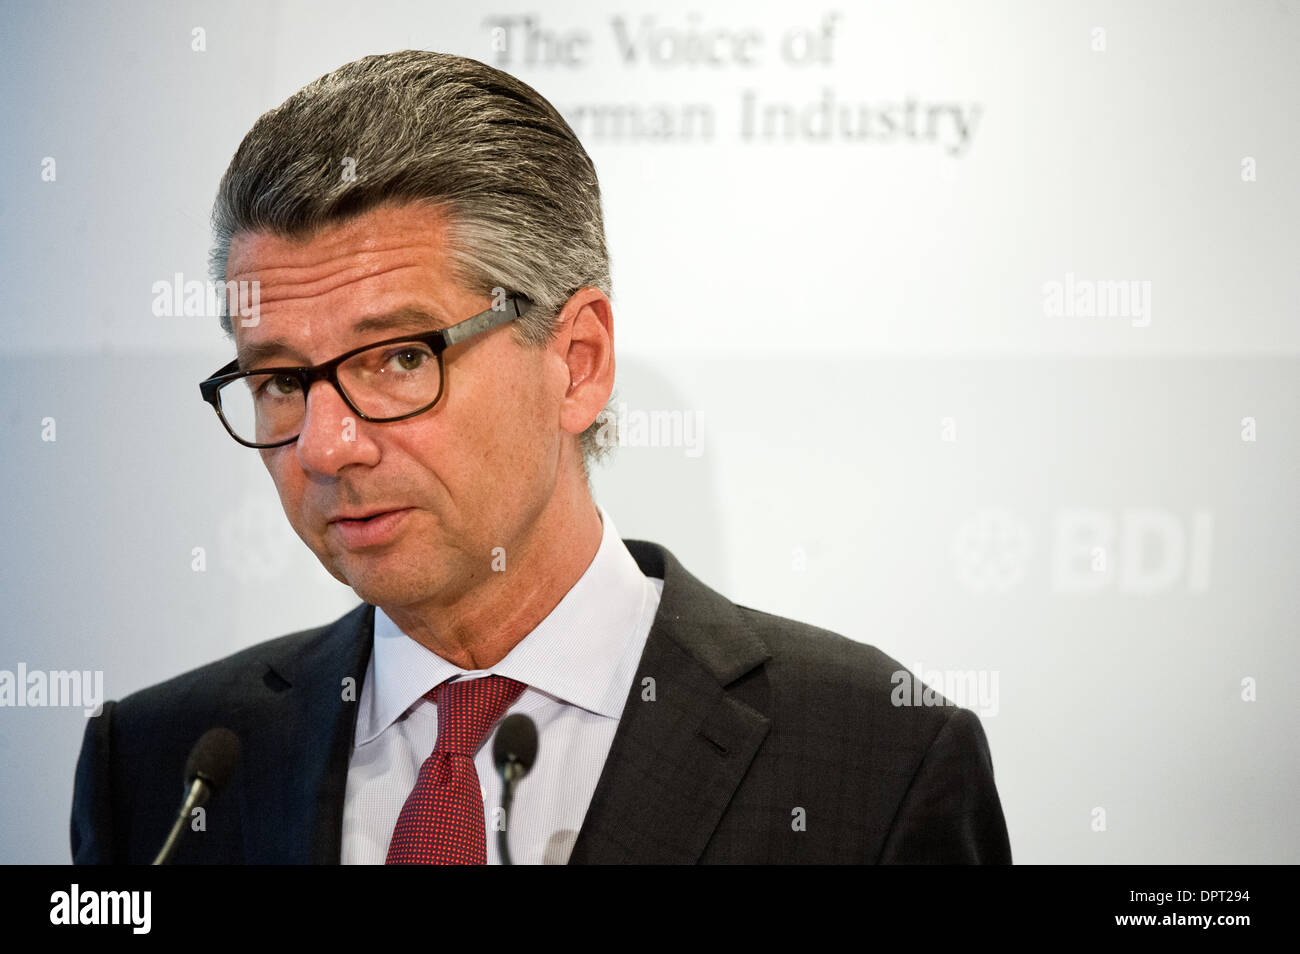 Berlin, Germany. 16th Jan, 2014. Ulrich Grillo, President of the Federation of German Industry (BDI), attends a press conference about the expectations of the BDI to the new federal government in Berlin, Germany, 16 January 2014. Photo: Bernd von Jutrczenka/dpa/Alamy Live News Stock Photo